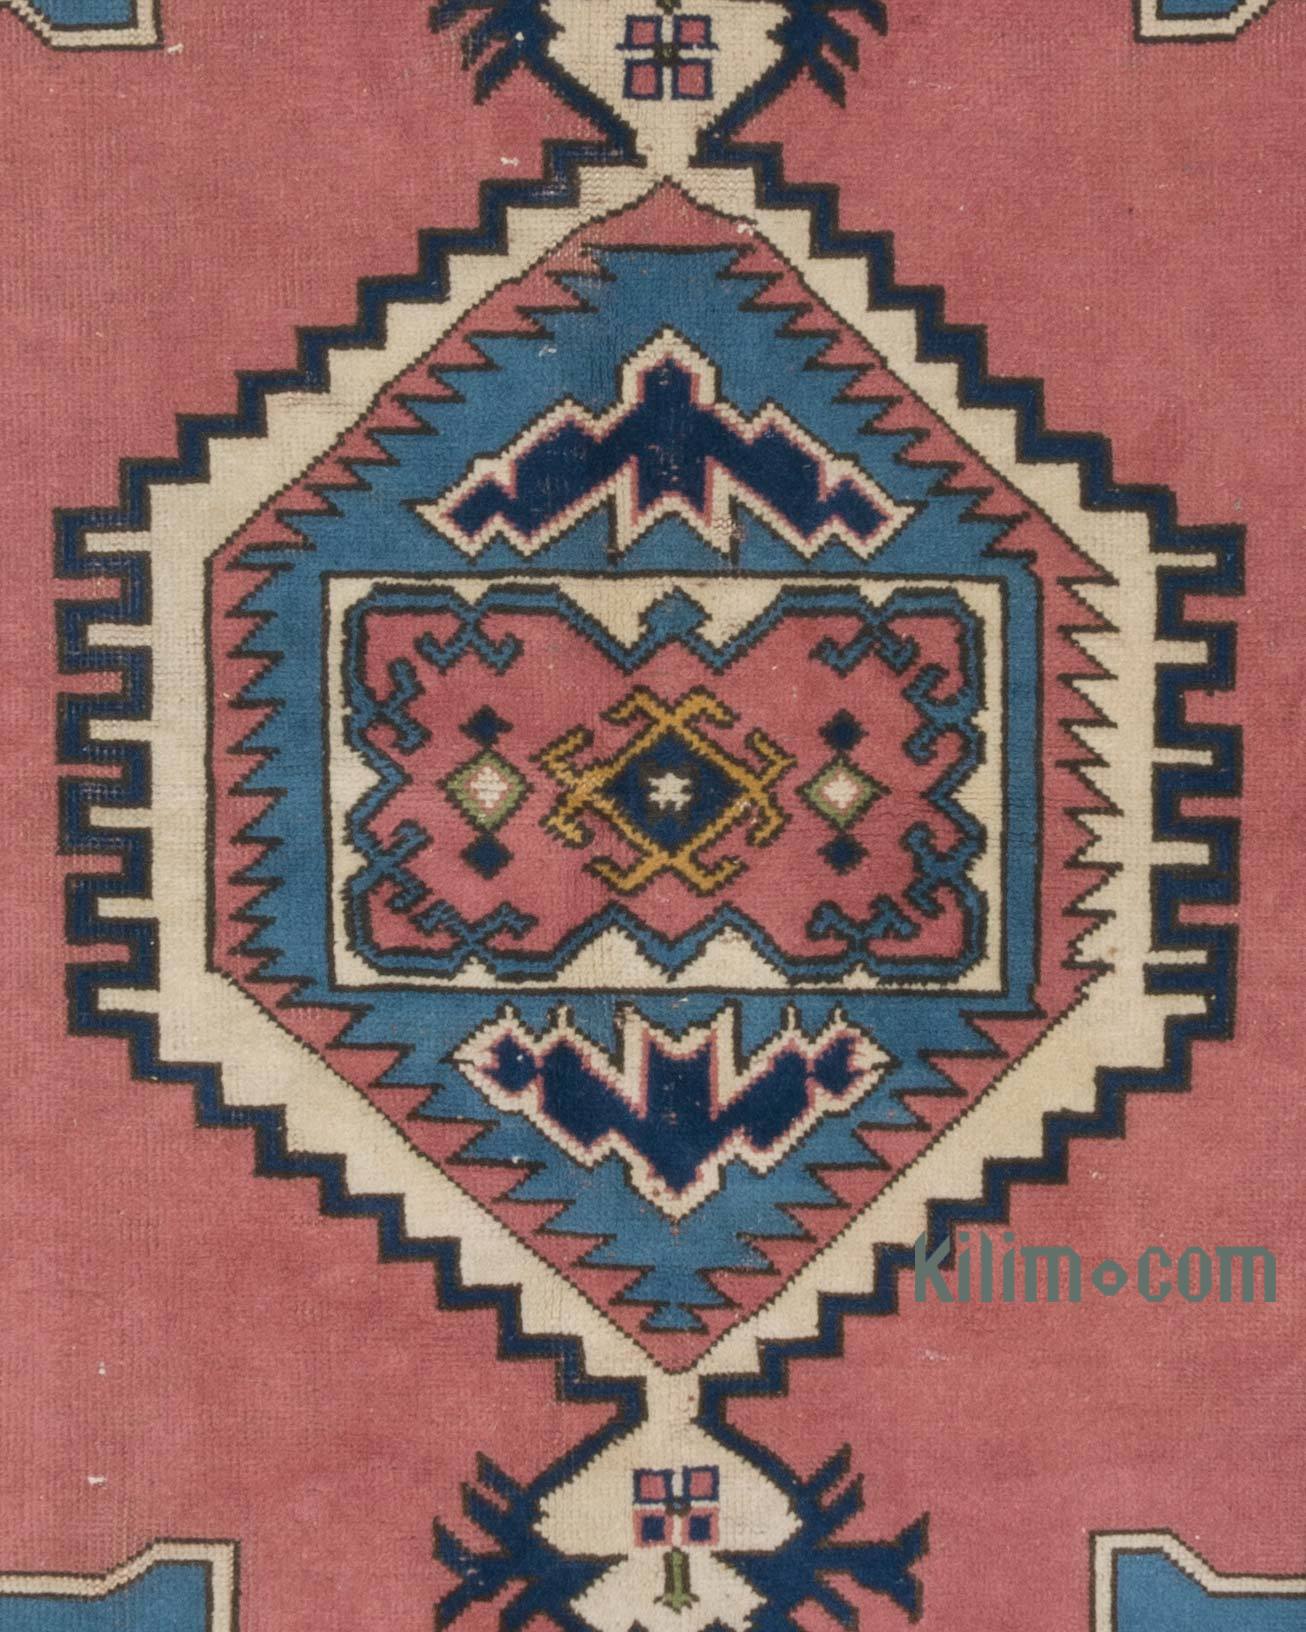 K0052830 Vintage Turkish Hand-Knotted Rug - 2' 4 x 3' 7 (28 x 43)  The  Source for Vintage Rugs, Tribal Kilim Rugs, Wool Turkish Rugs, Overdyed  Persian Rugs, Runner Rugs, Patchwork